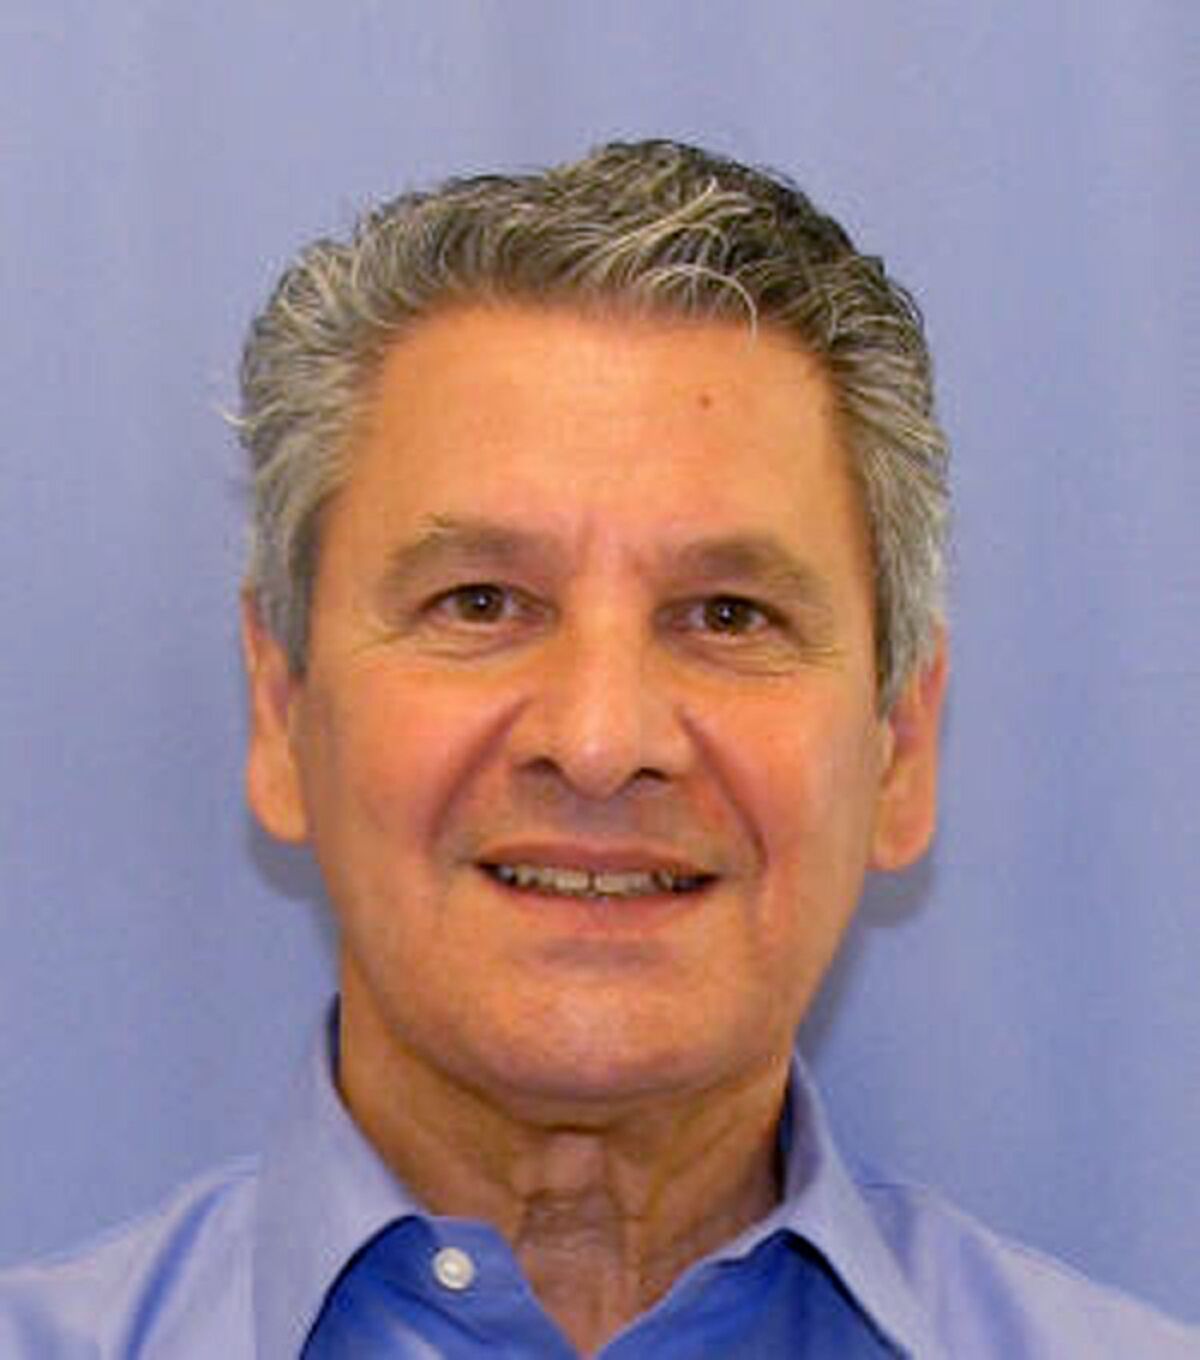 University of Pittsburgh medical researcher Dr. Robert Ferrante faces charges in the cyanide poisoning death of his neurologist wife.